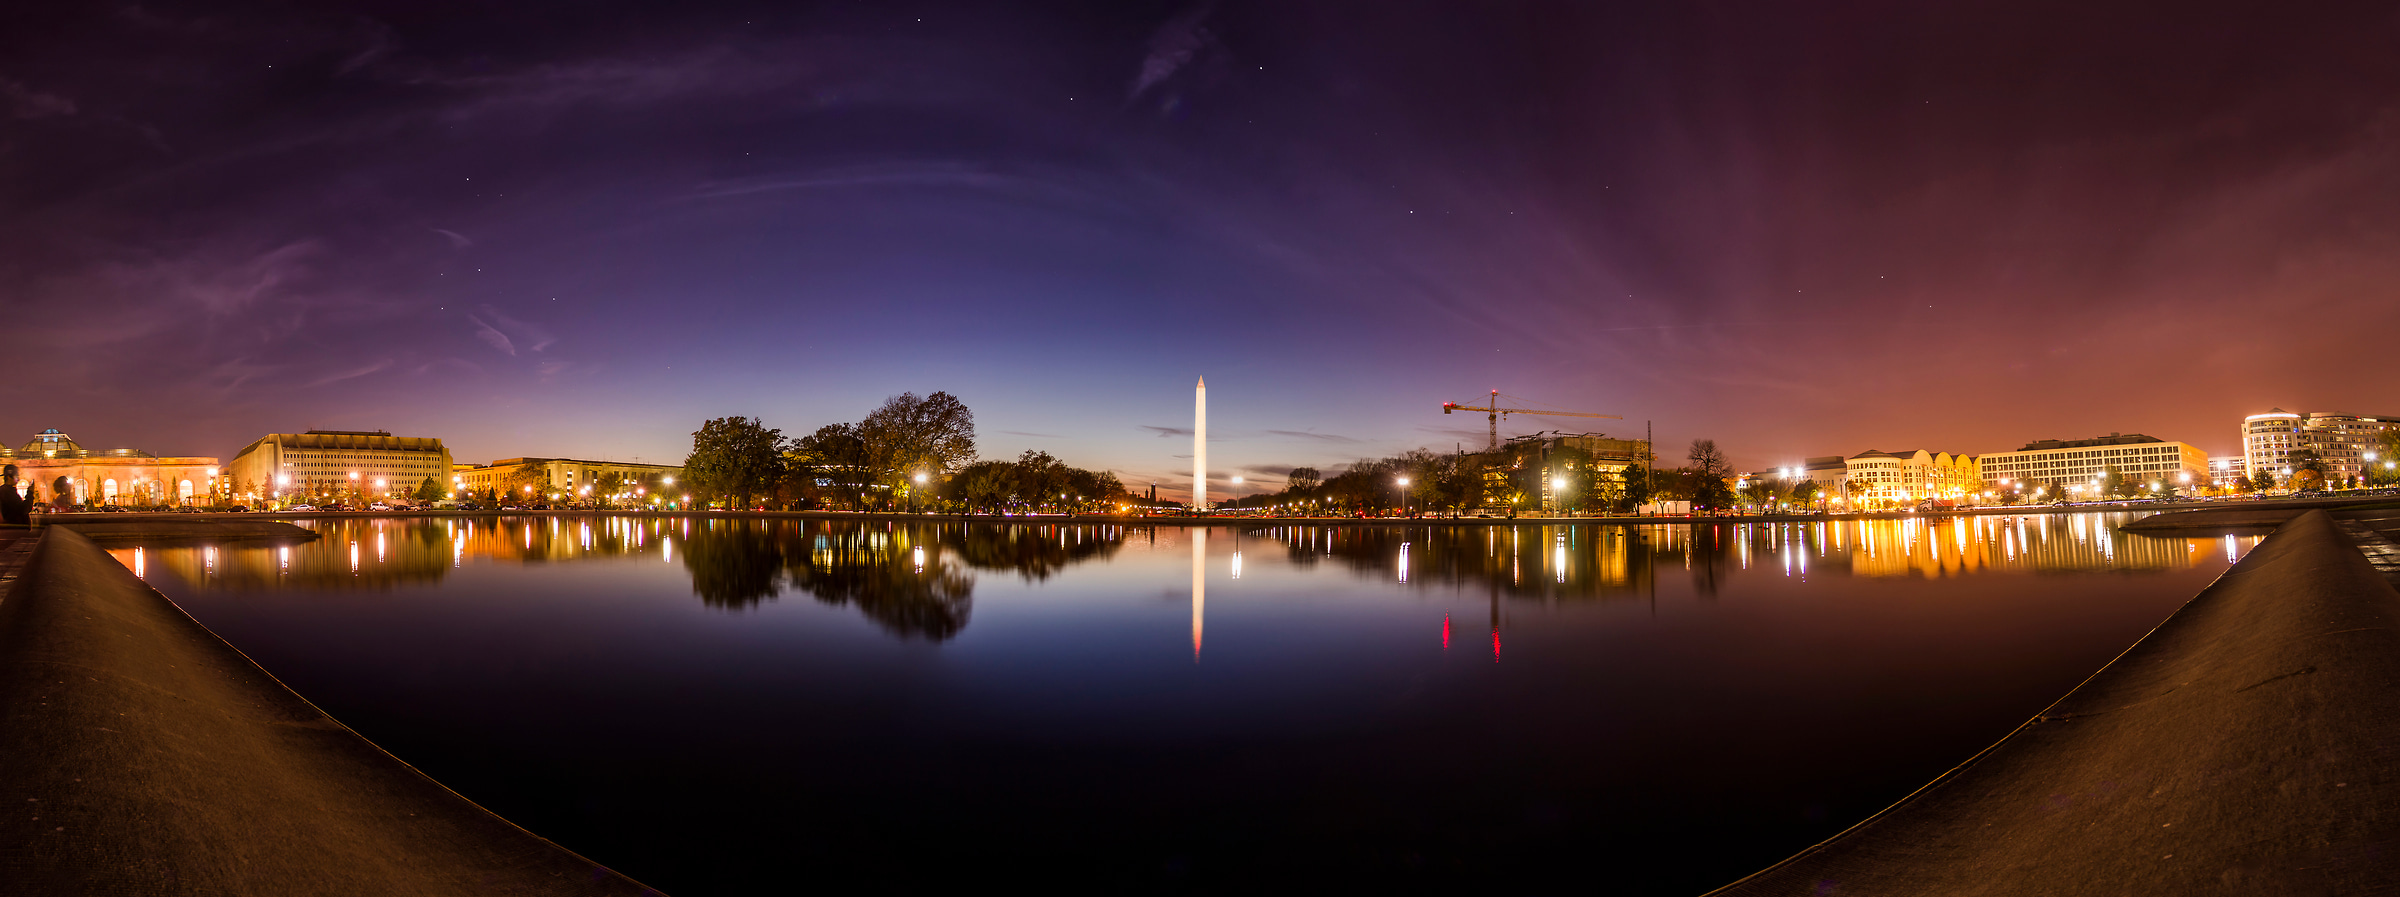 73 megapixels! A very high resolution VAST photo of the National Mall and the Washington Monument reflected in the Reflecting Pools at dusk; created by Dan Piech.